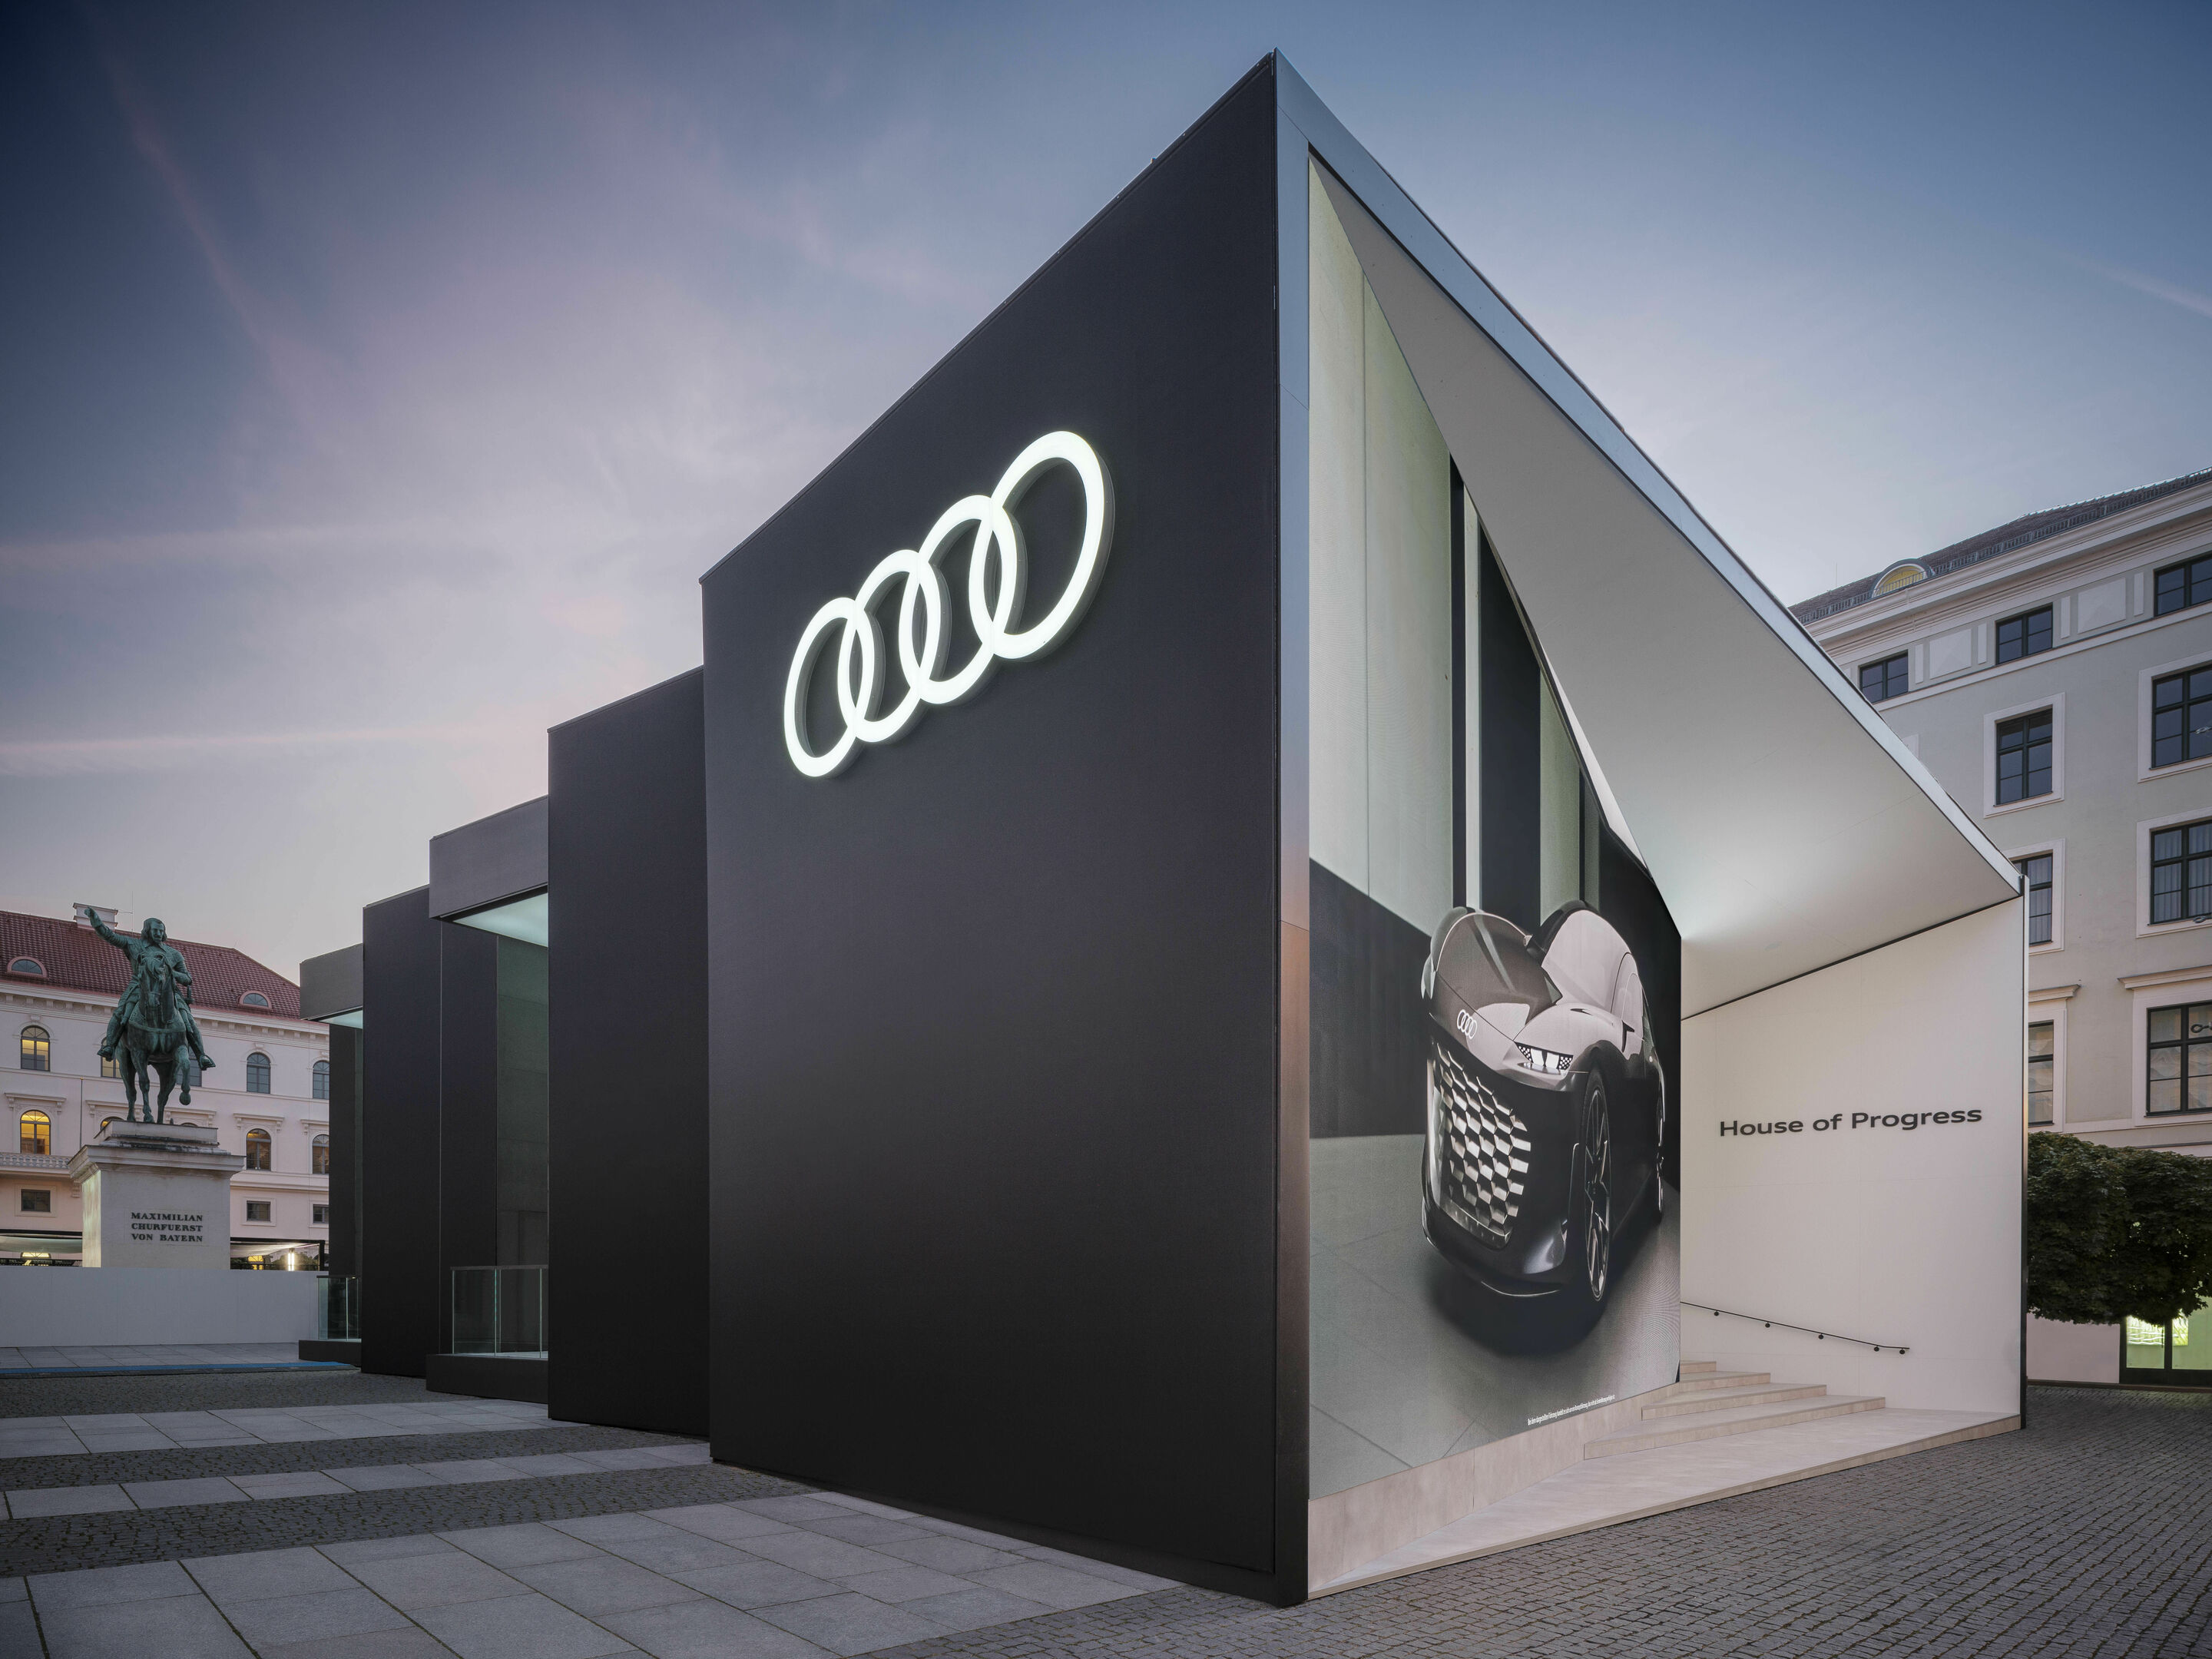 Impressions of Audi’s presentation at the IAA Mobility 2021 in Munich